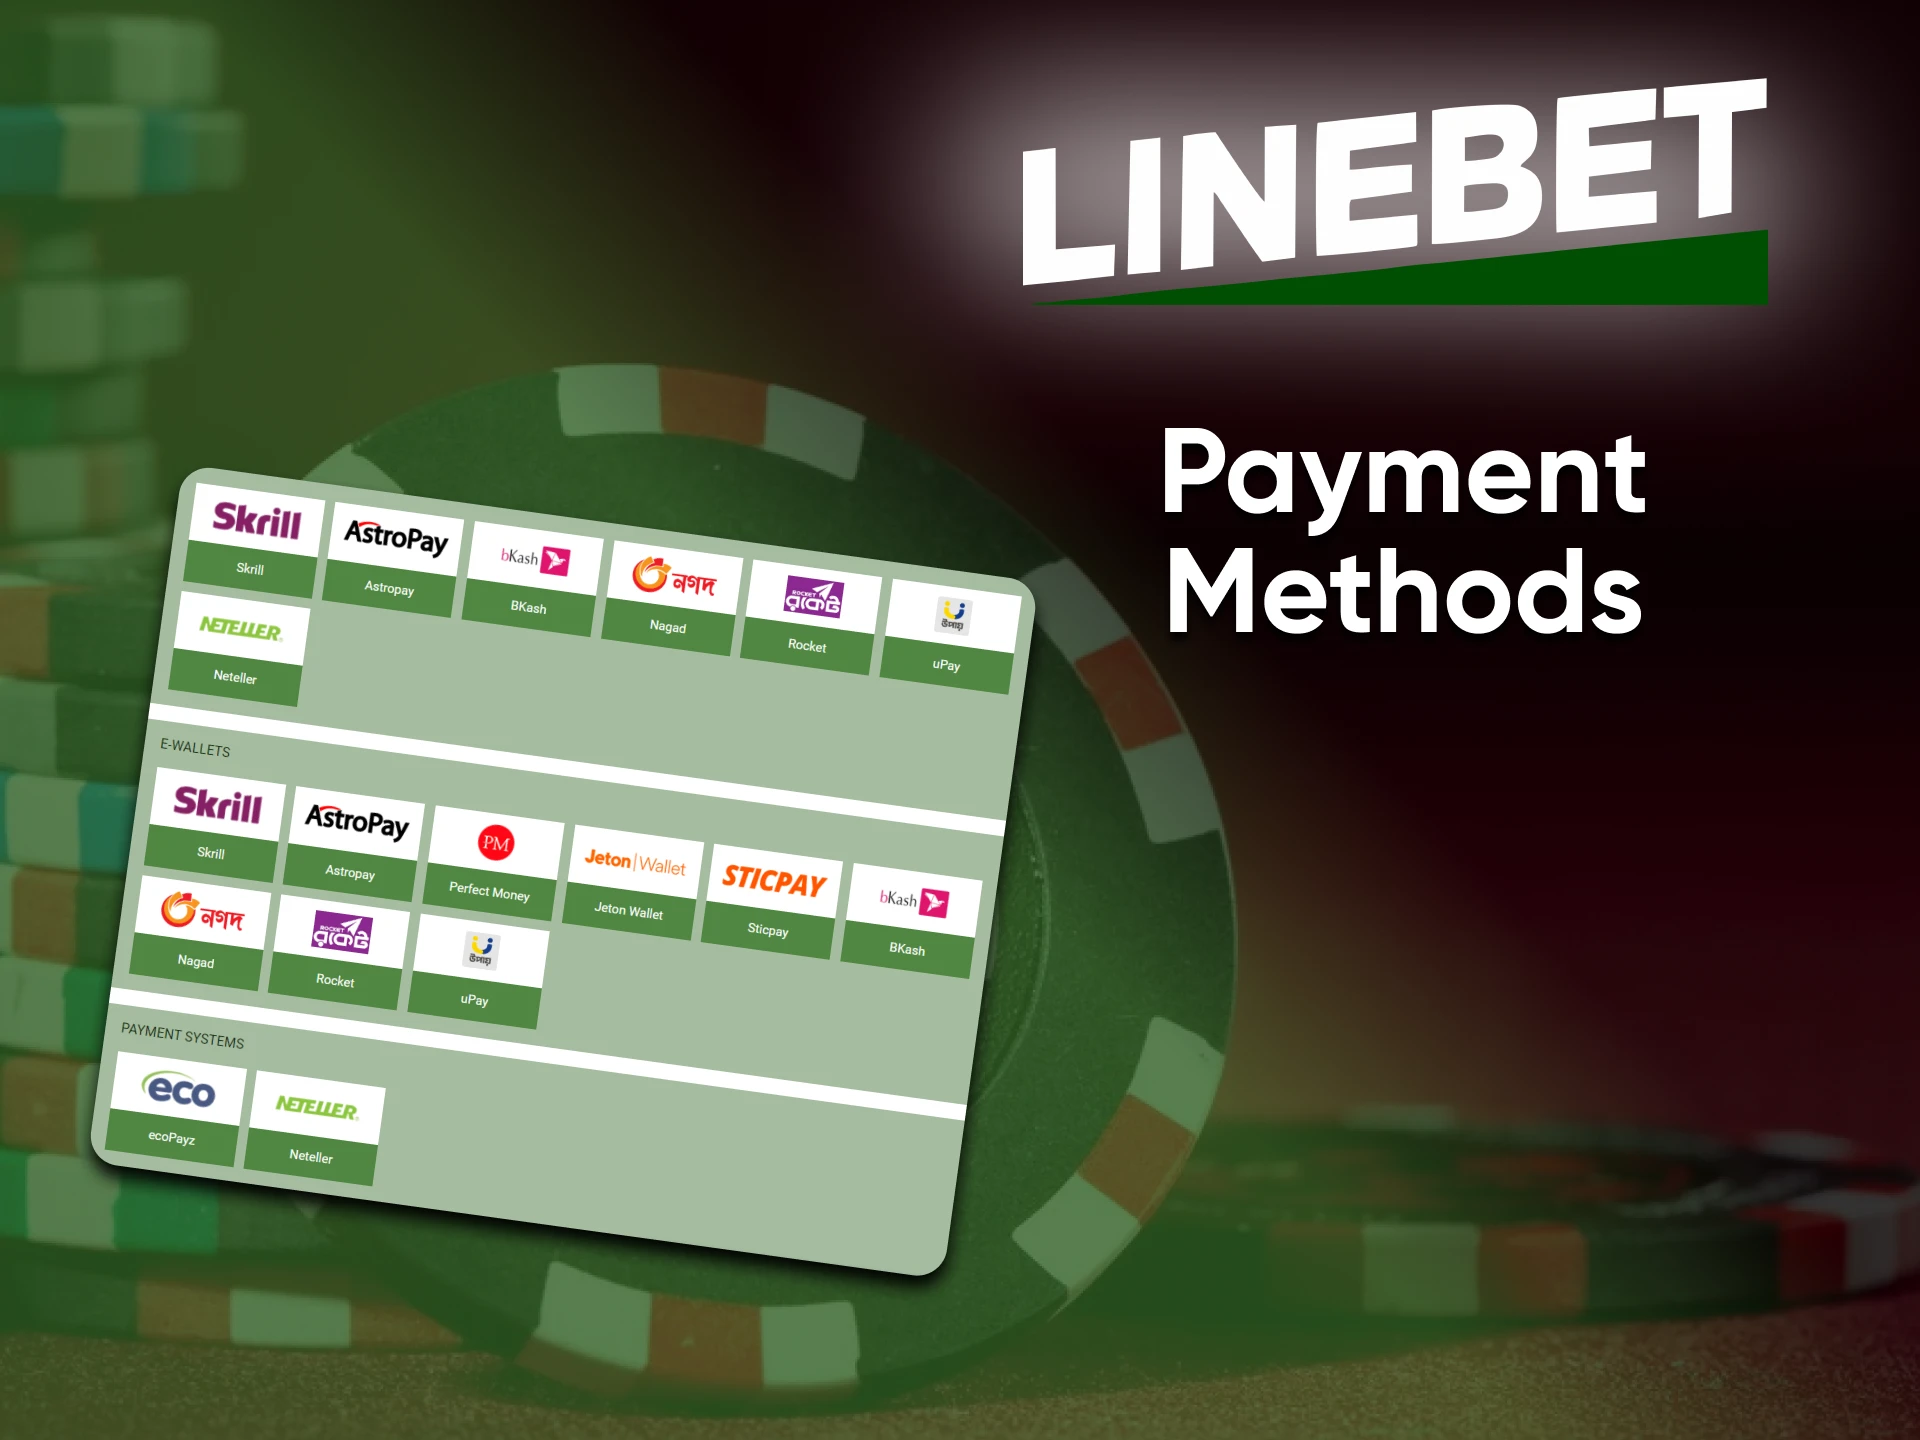 To replenish your account, choose a convenient method from Linebet.